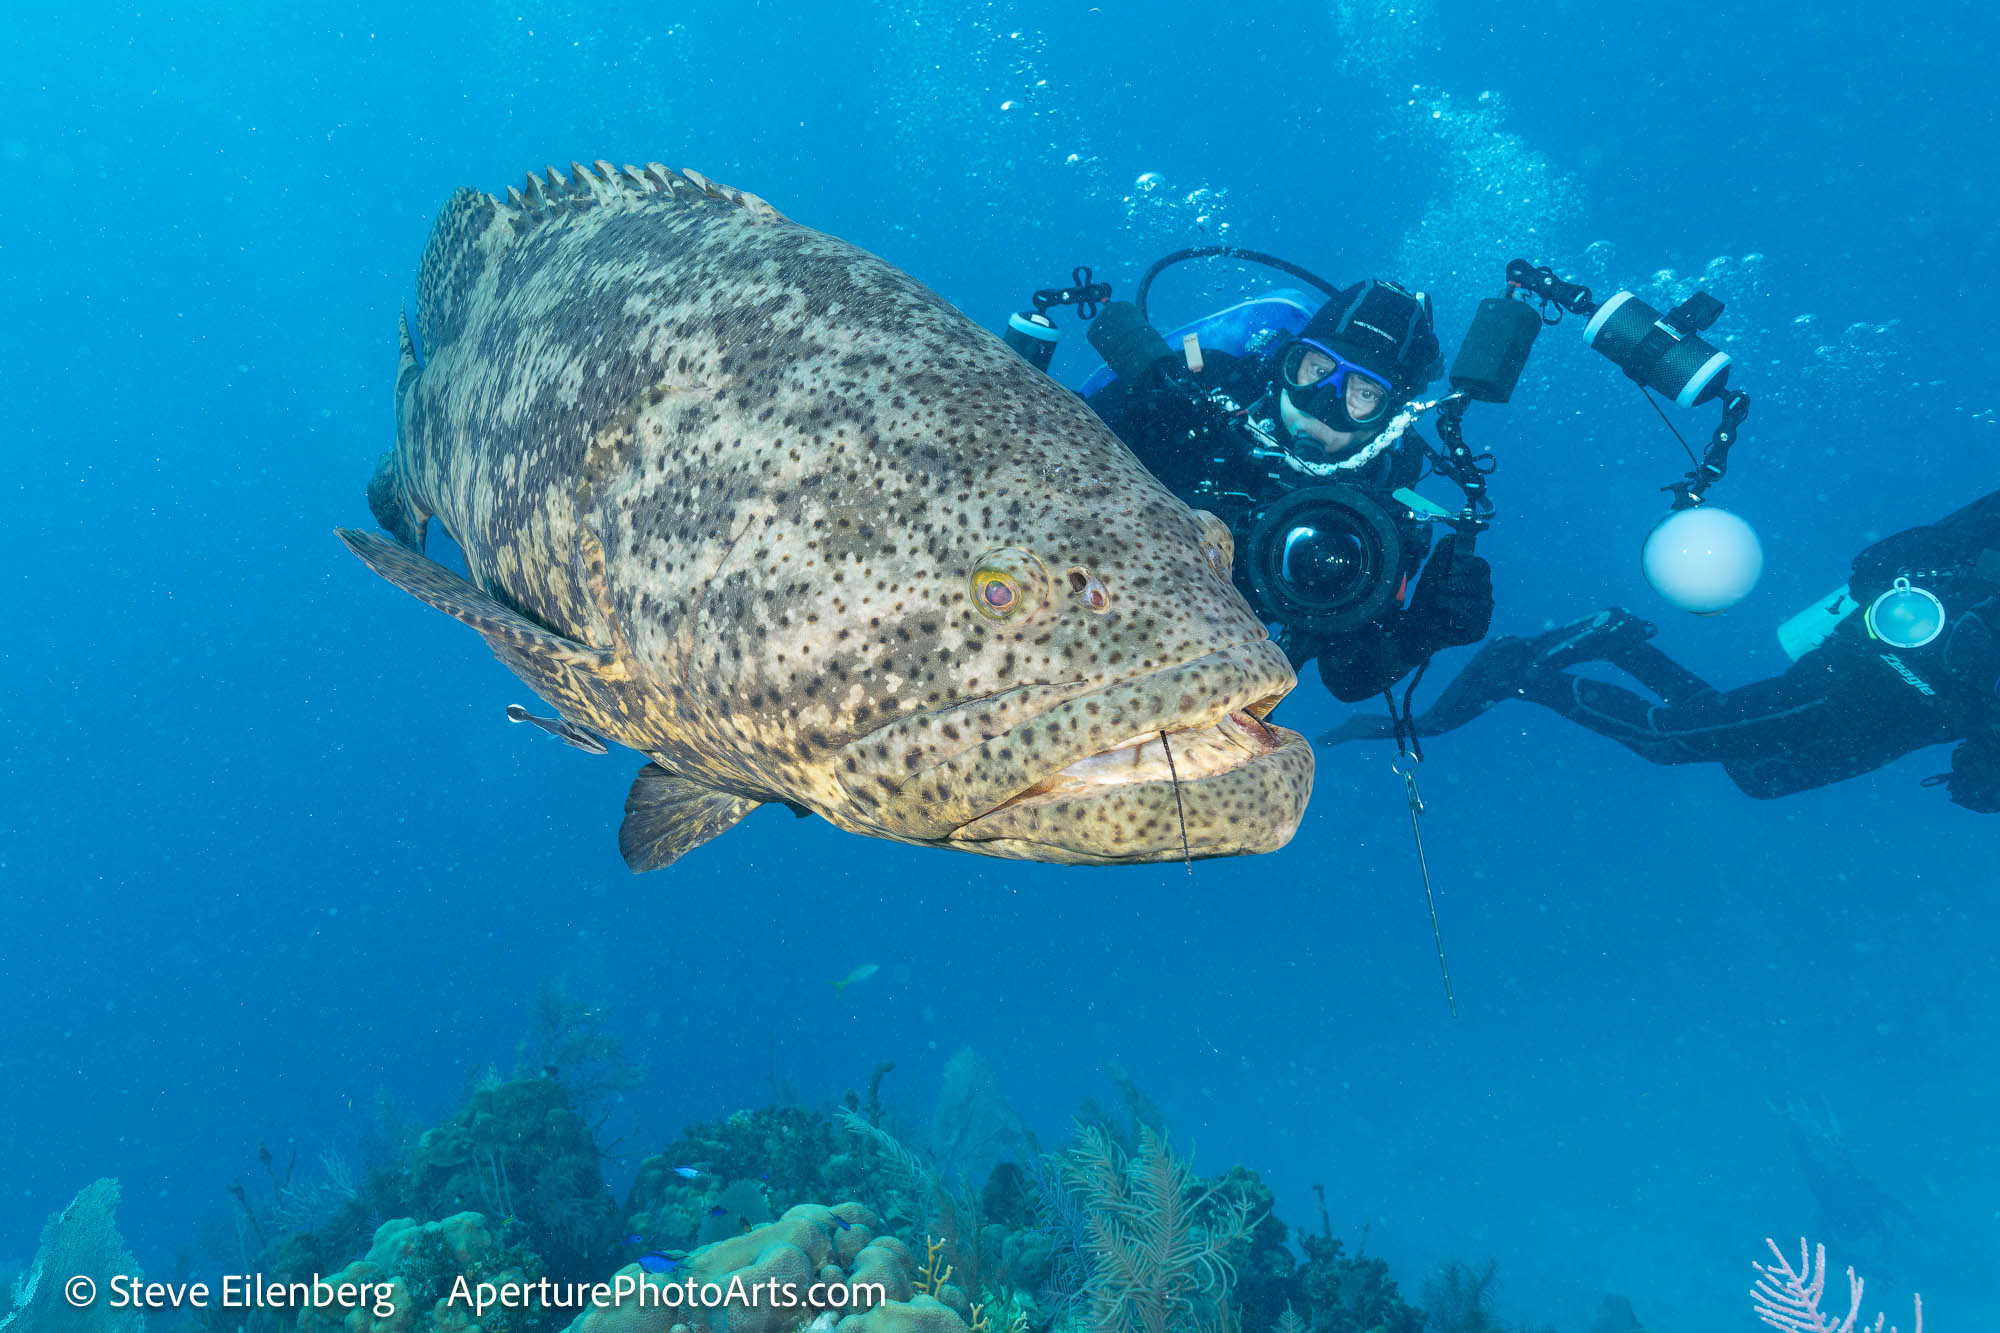 Goliath Grouper with Marie for scale